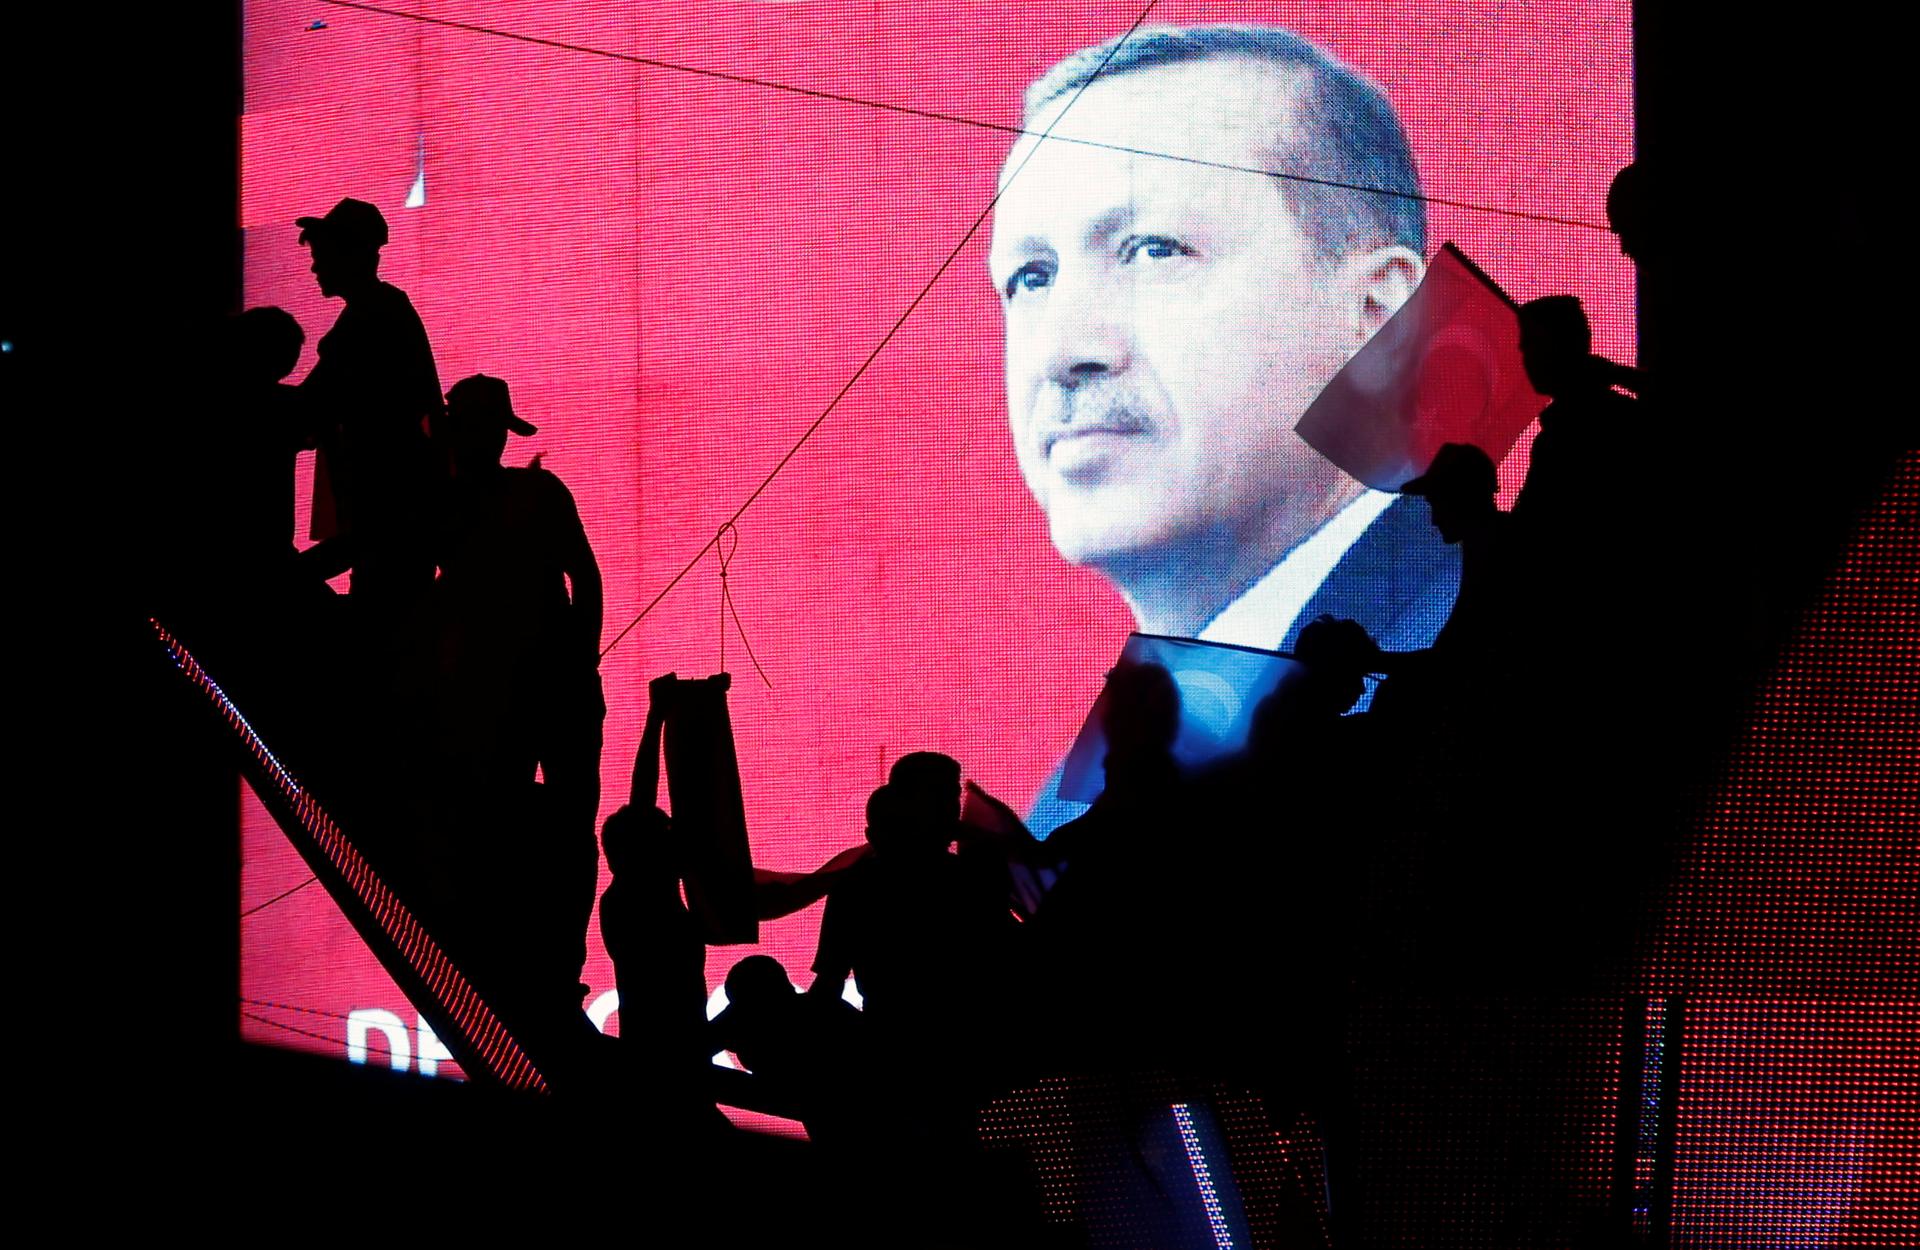 Activists in Turkey are silhouetted against a screen showing President Tayyip Erdogan during a pro-government demonstration in Ankara, Turkey, July 17, 2016.